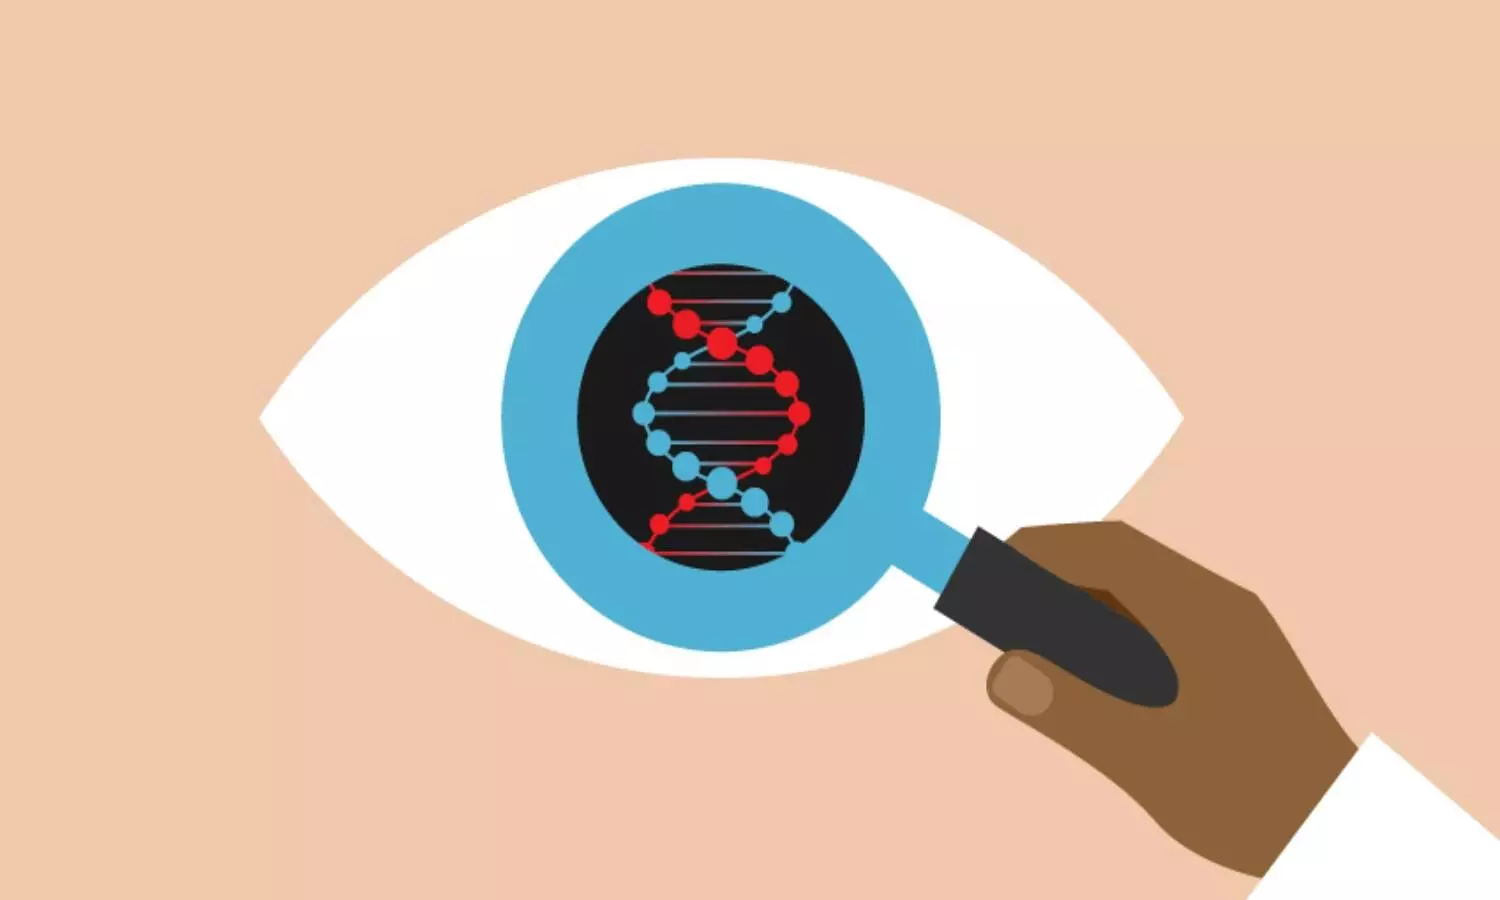 Ocular Genetic Research: GF, LVPEI sign MoU for affordable eye-care treatment